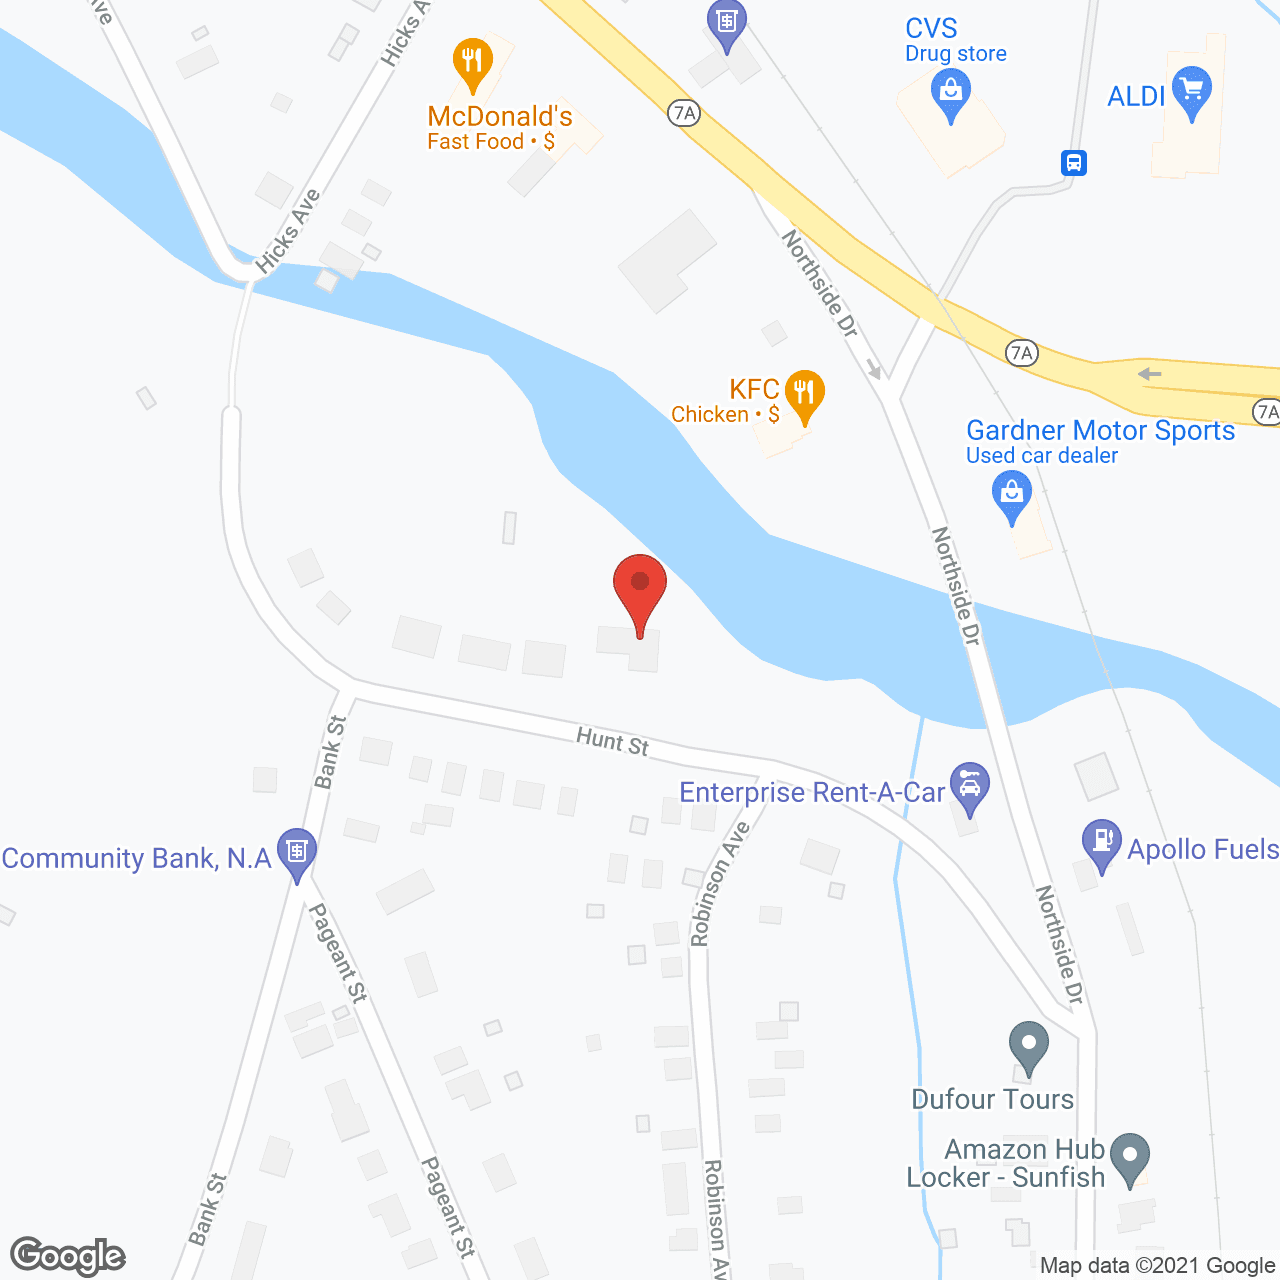 Rivers Edge Cch in google map